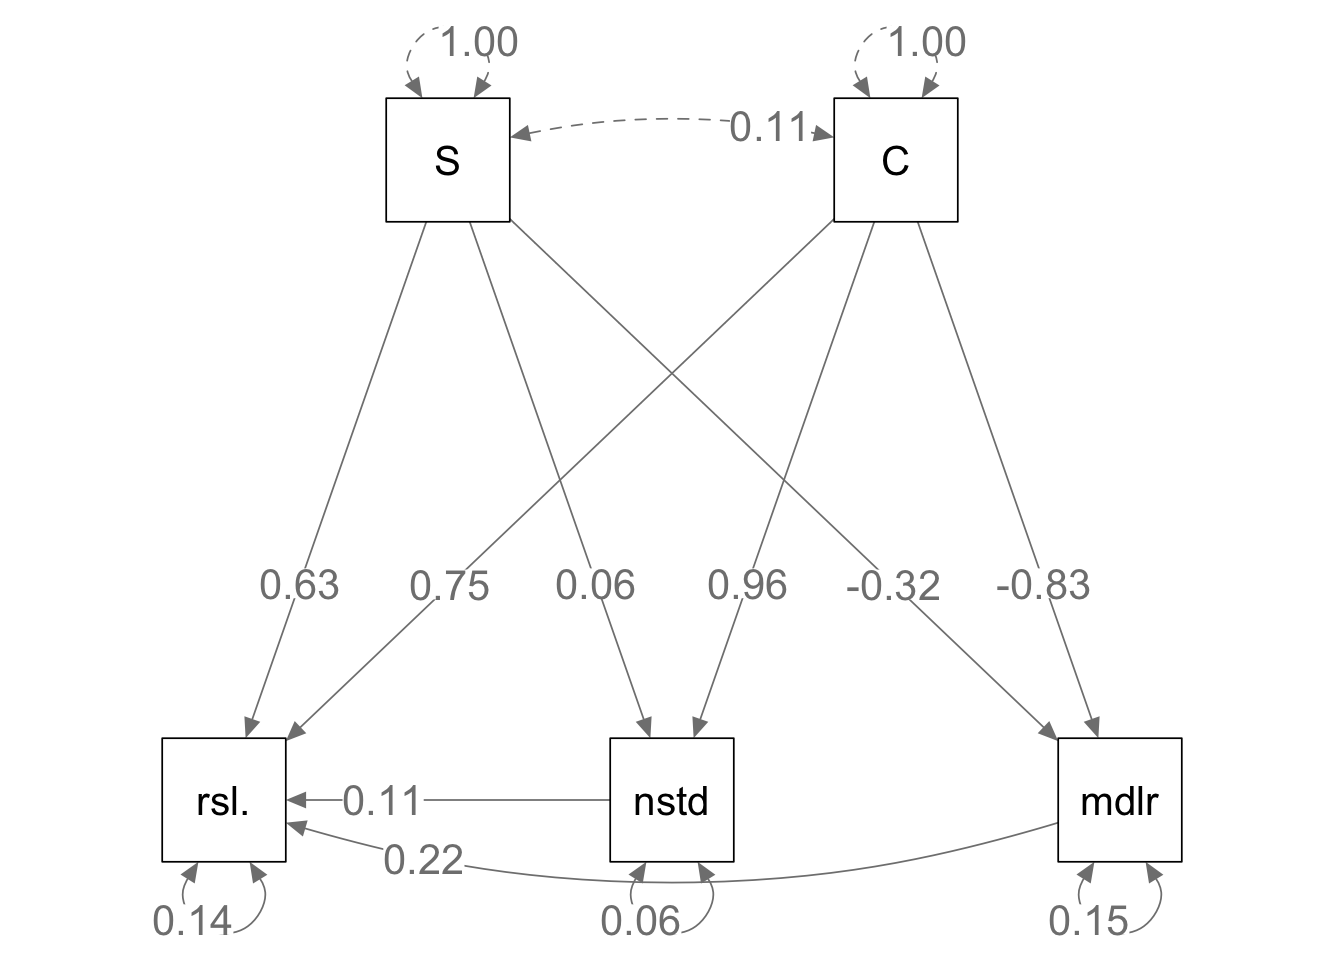 Given the same bipartite network structure and the identical interaction strengths, mutualistic (left) and antagonistic webs (right) show slightly different relations among emergent properties.